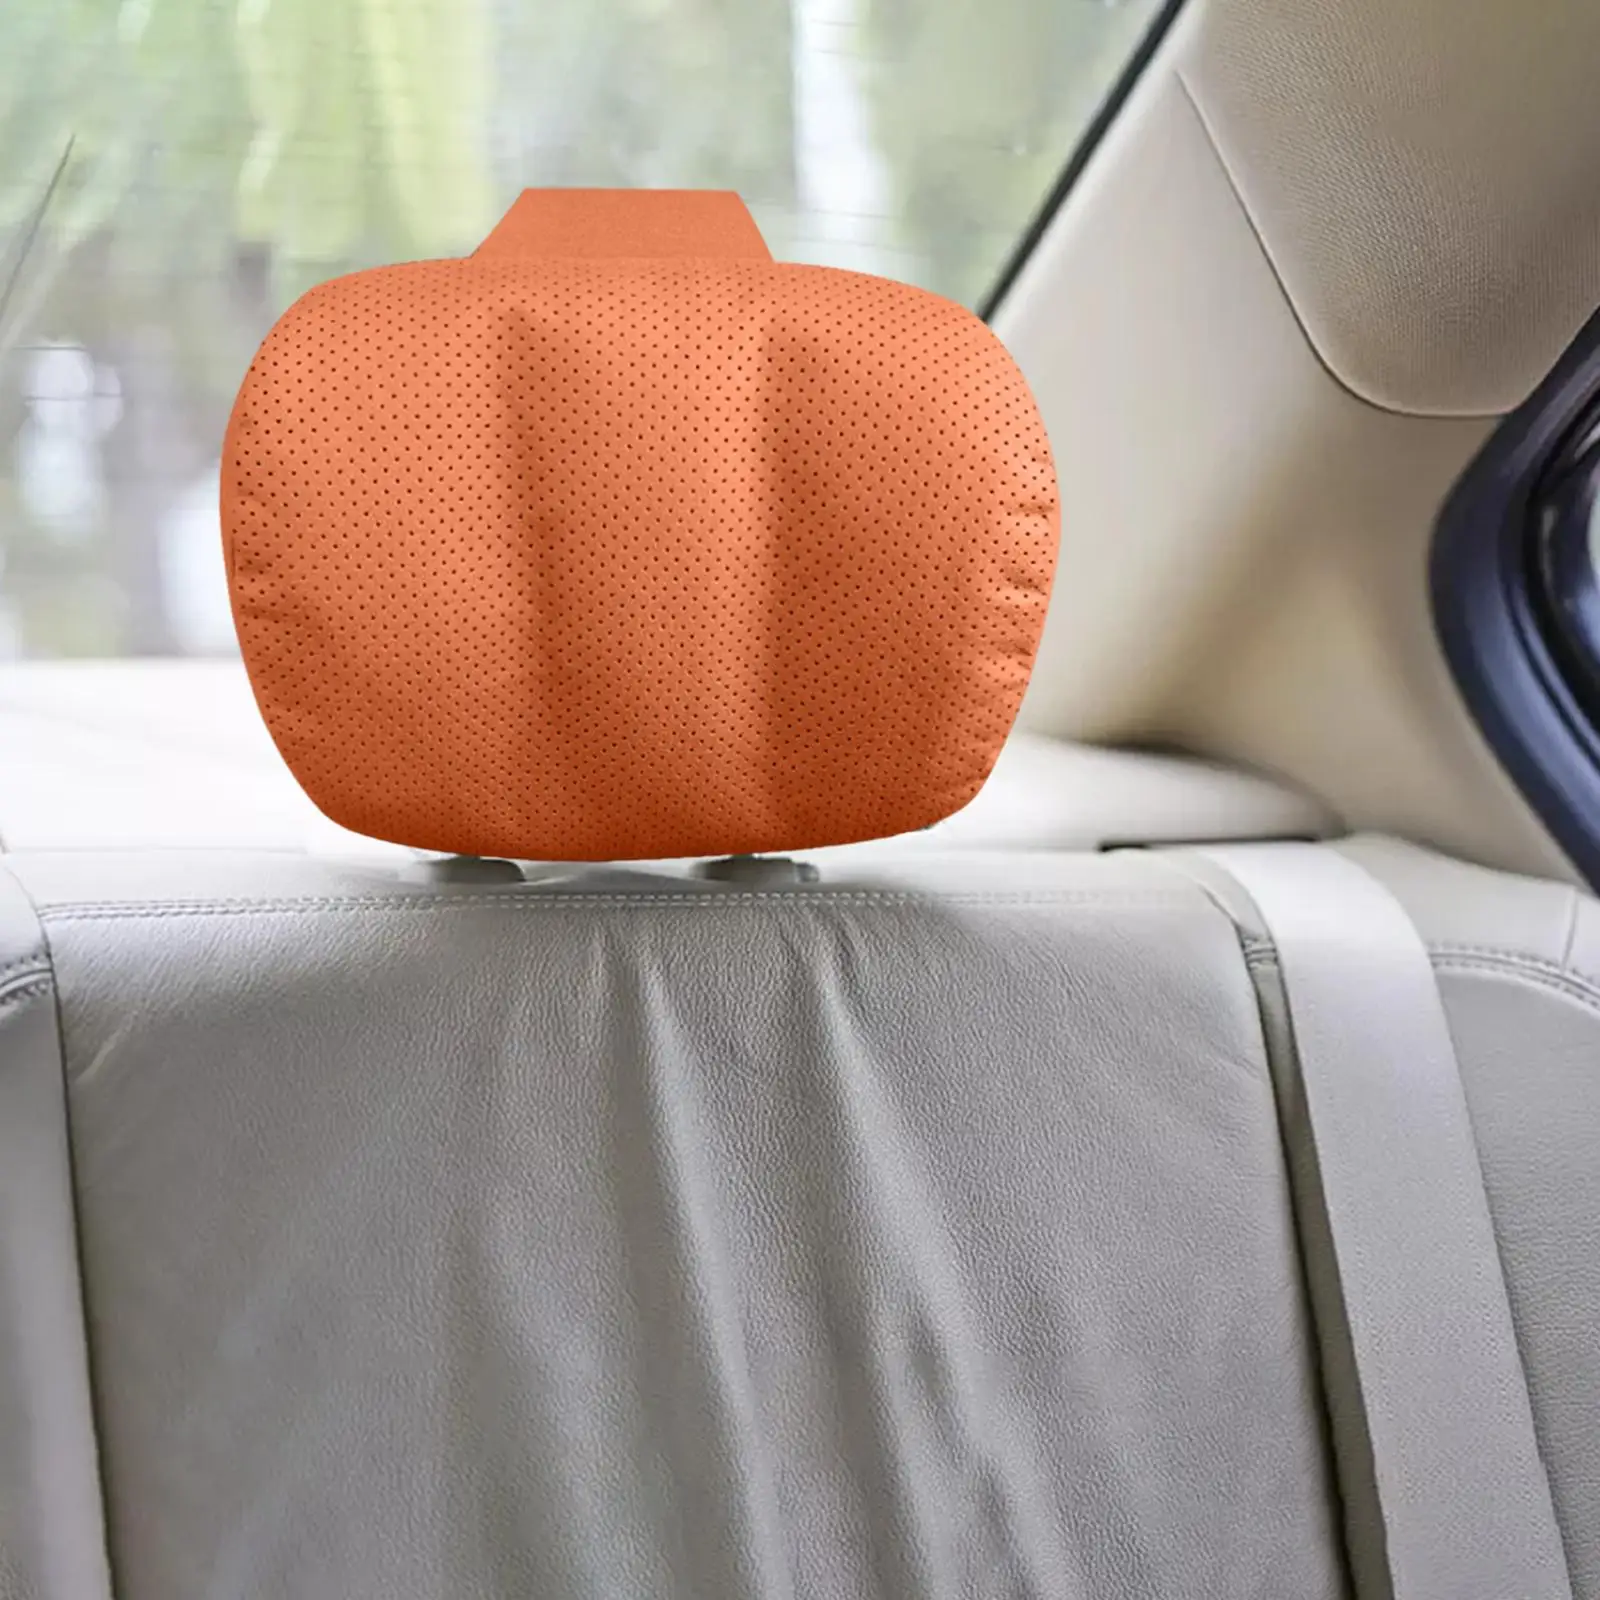 Head Rest Pillows Breathable Interior Accessories Premium Soft Automotive Neck Support for Home Office Travel Driving Seat